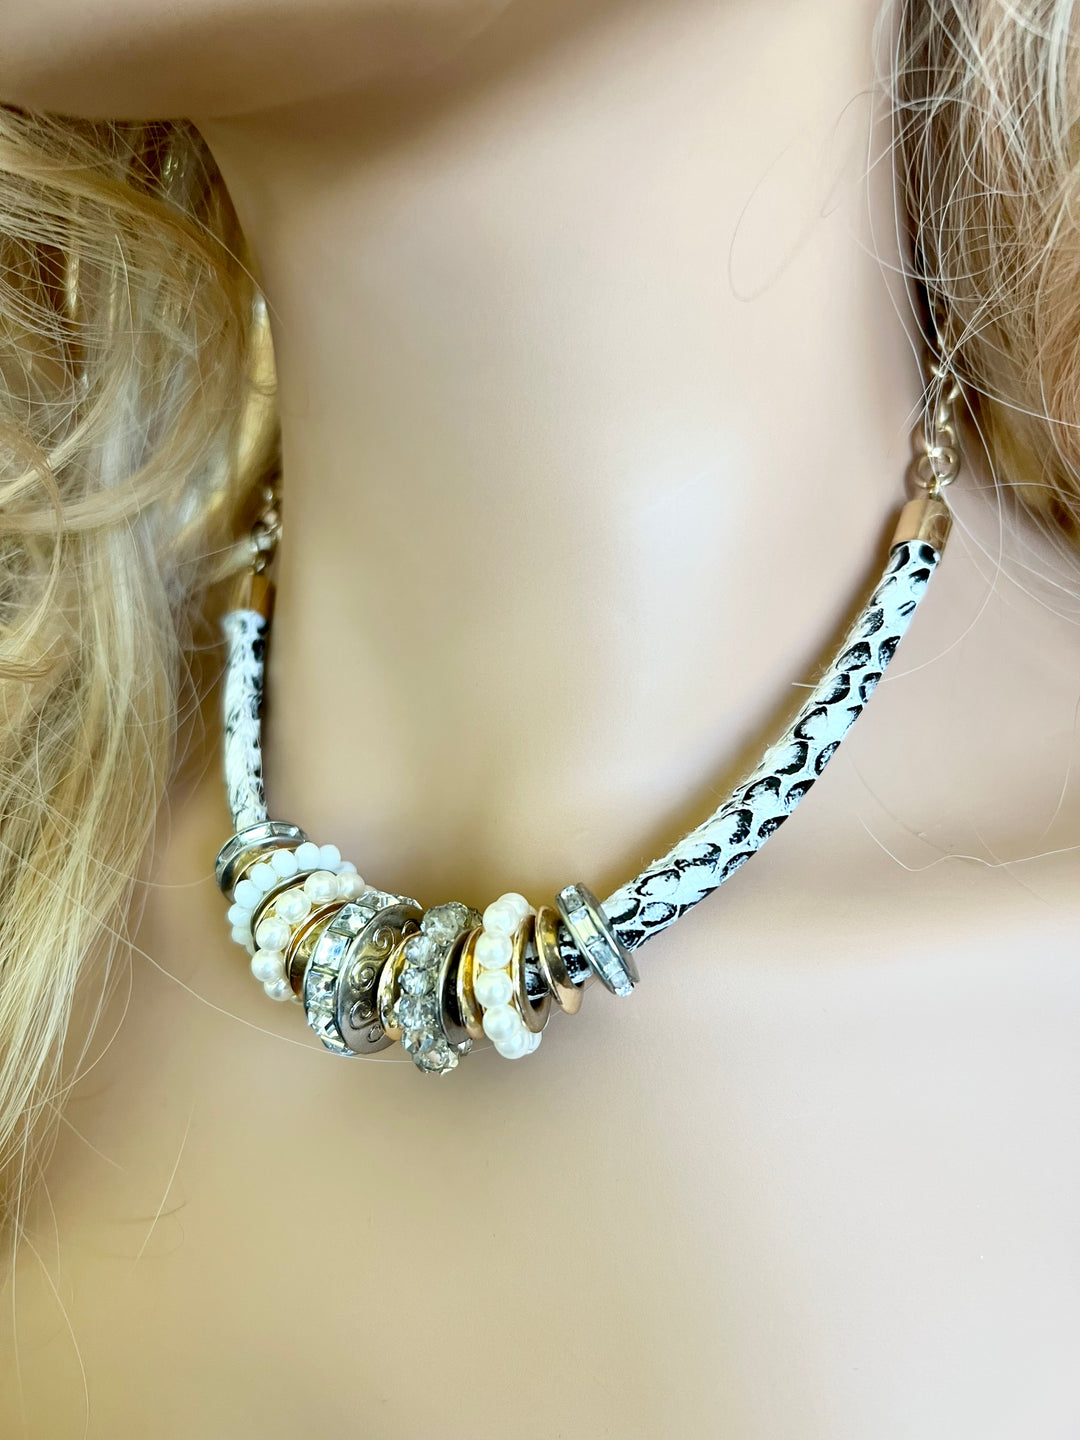 Handmade Beaded Black and White Animal Print Tube Statement Necklace with Gold Accents